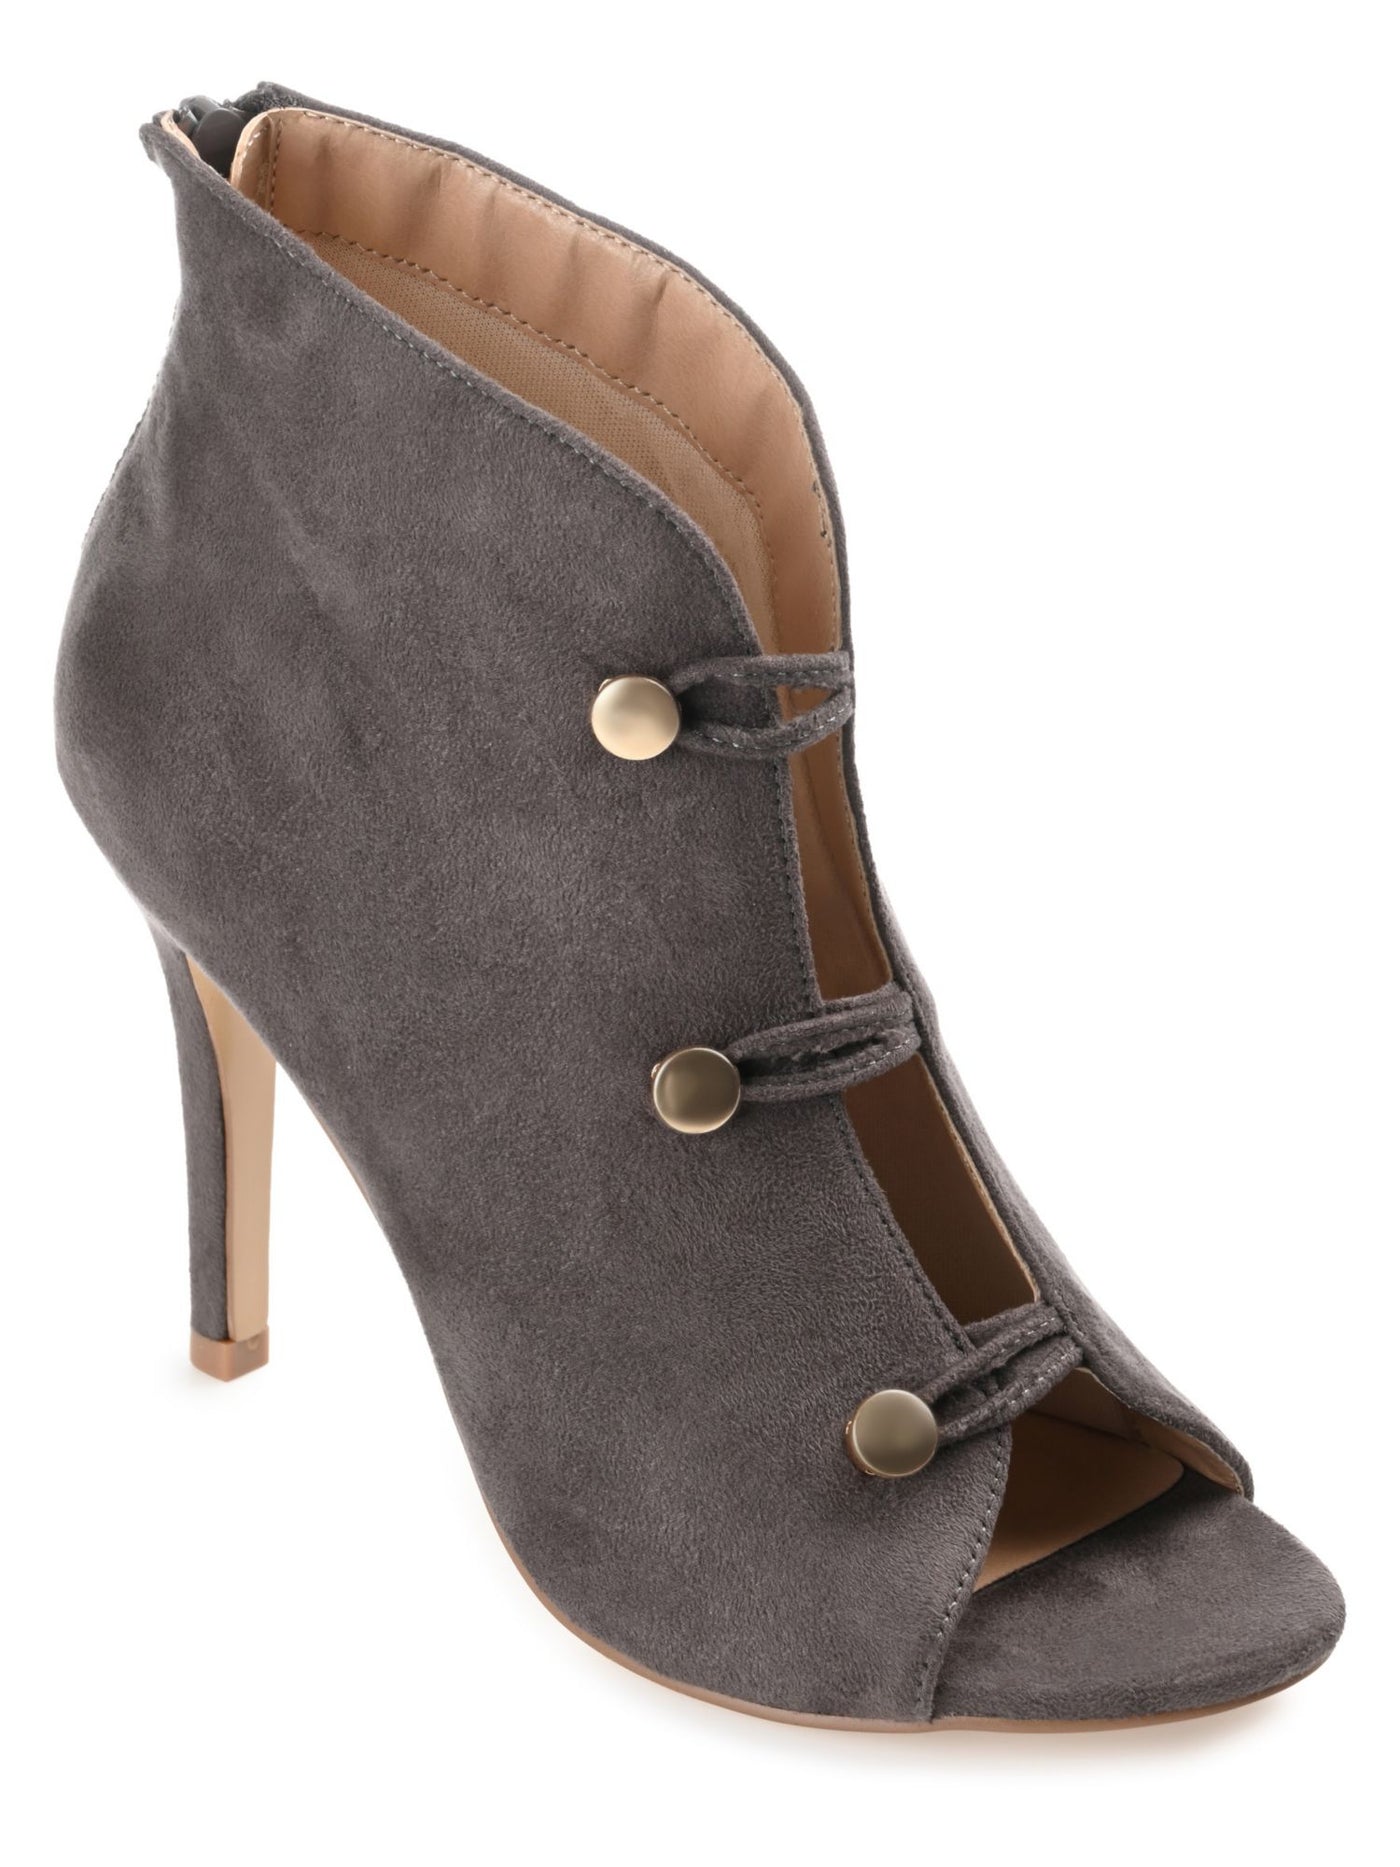 JOURNEE COLLECTION Womens Gray Slit Front Padded Button Accent Brecklin Open Toe Stiletto Zip-Up Dress Booties 11 M